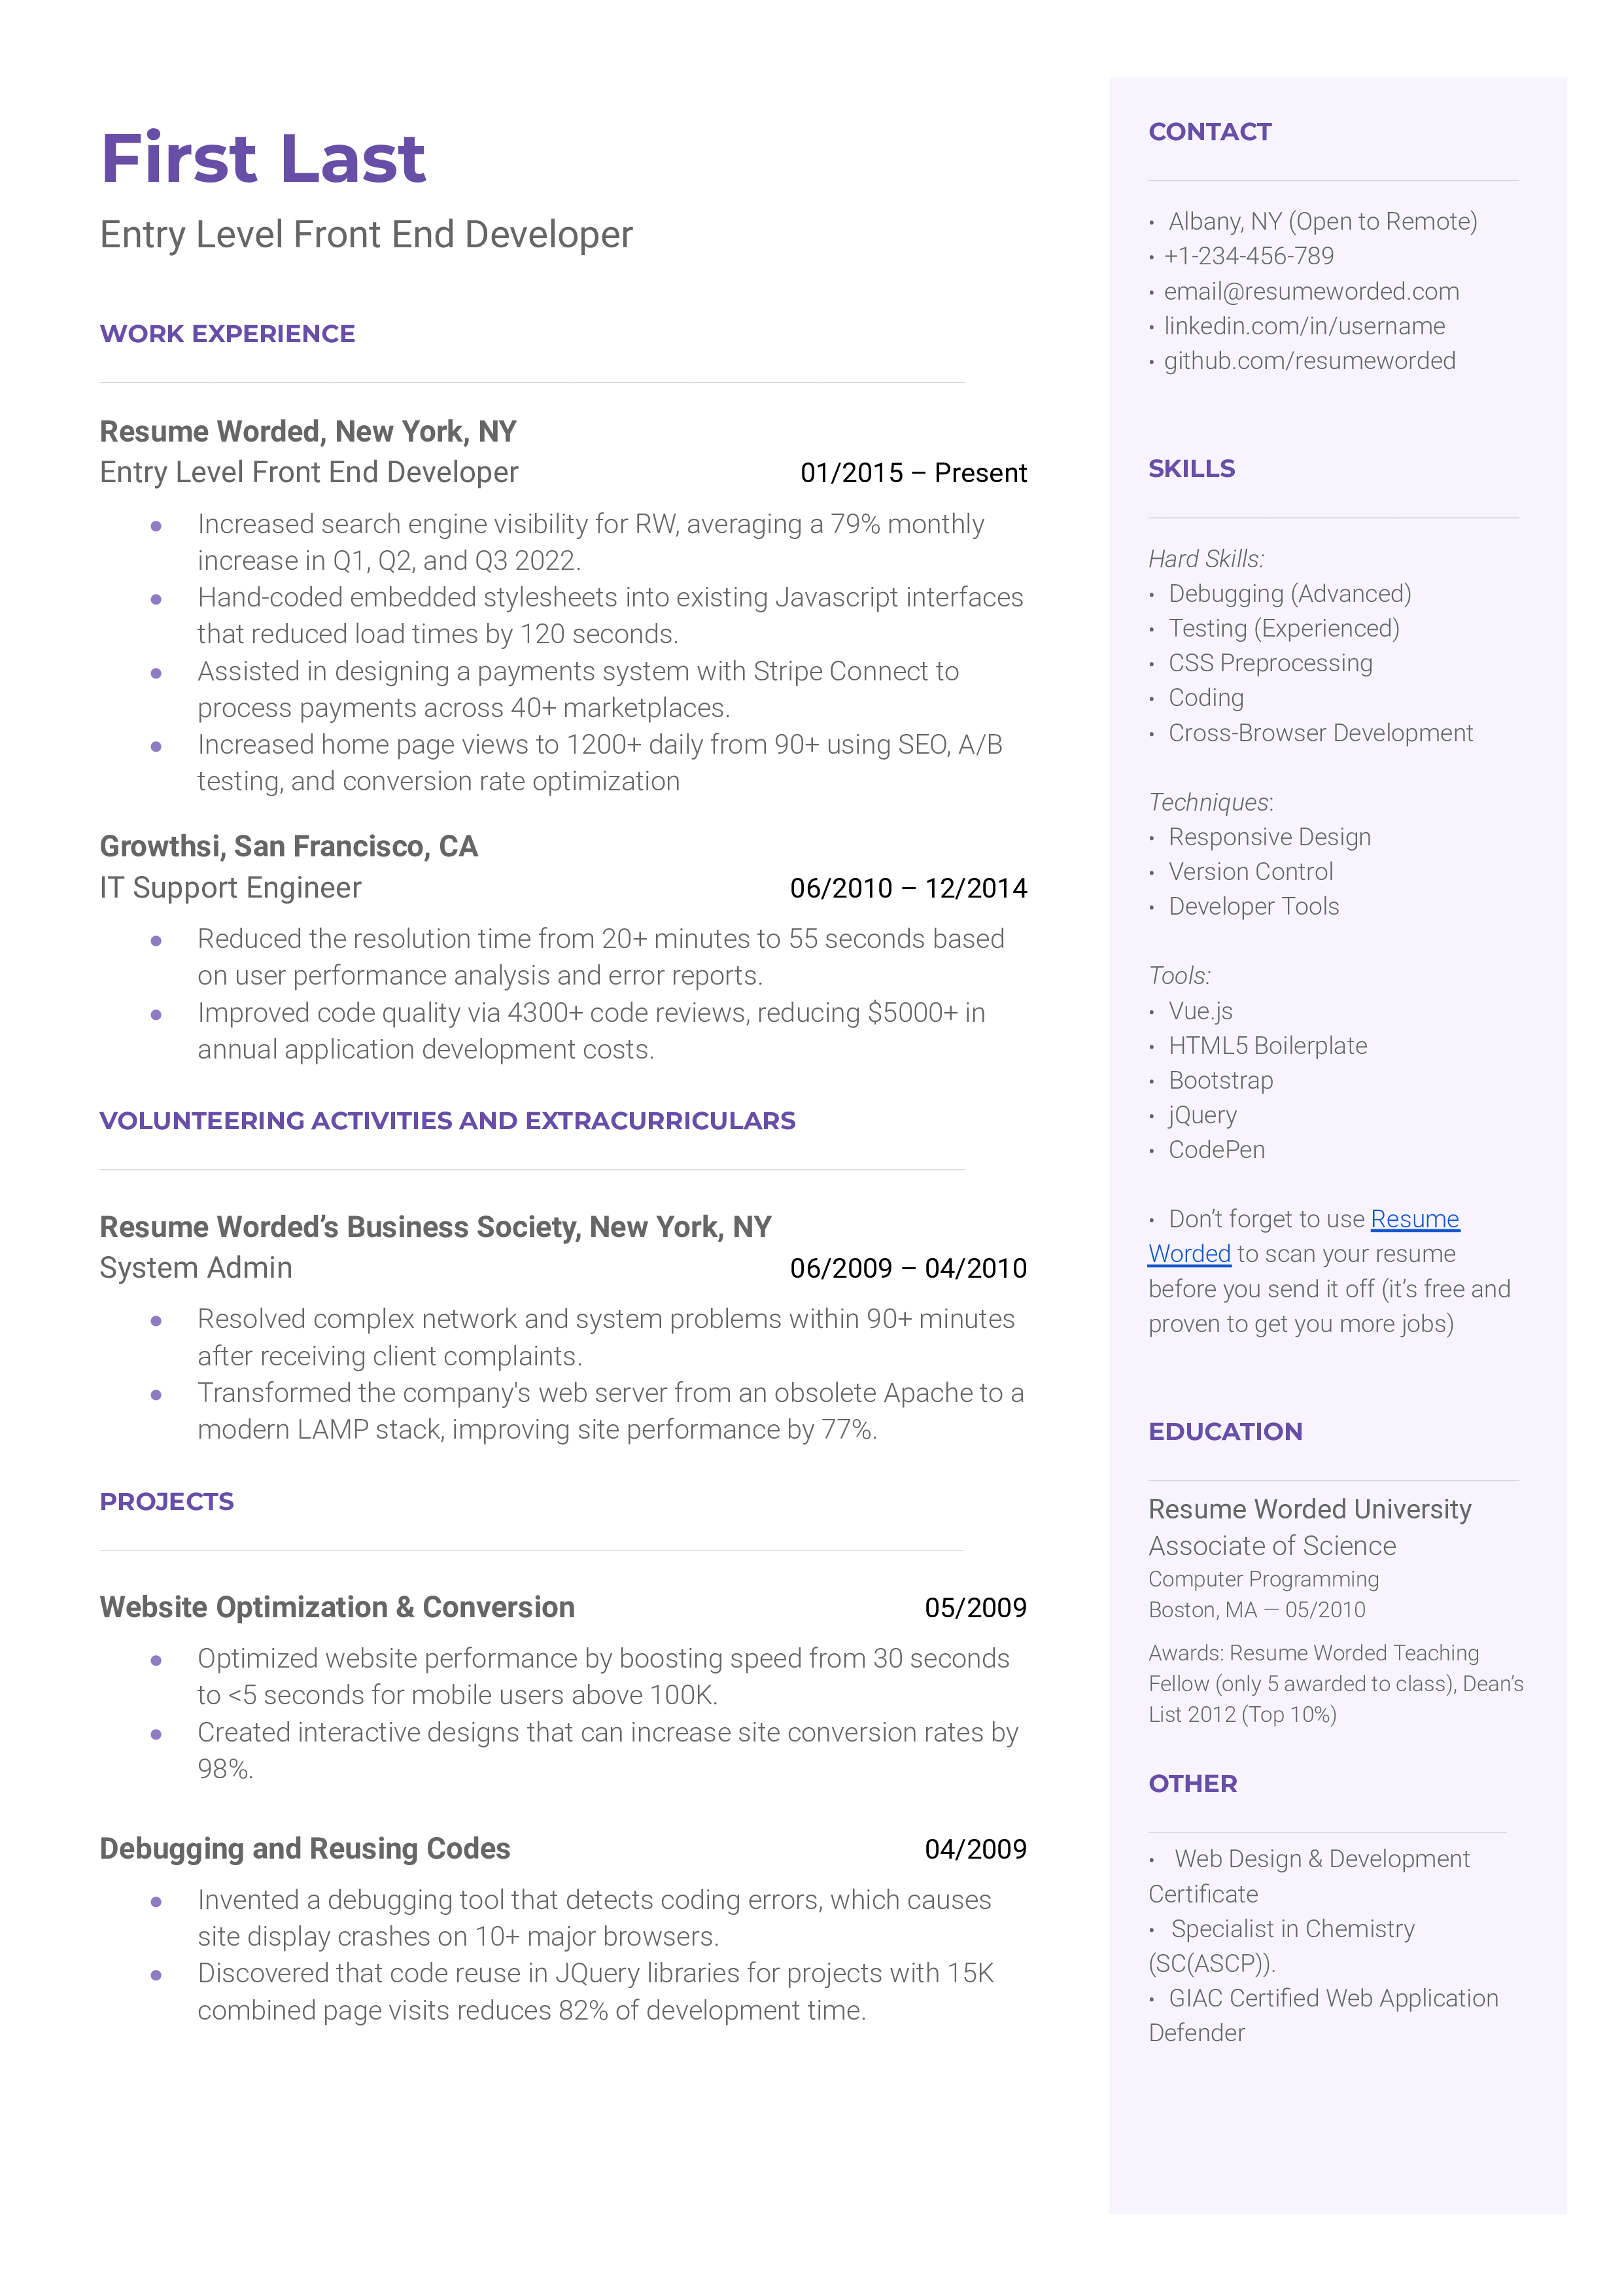 An engaging CV layout for entry-level front-end developer role.